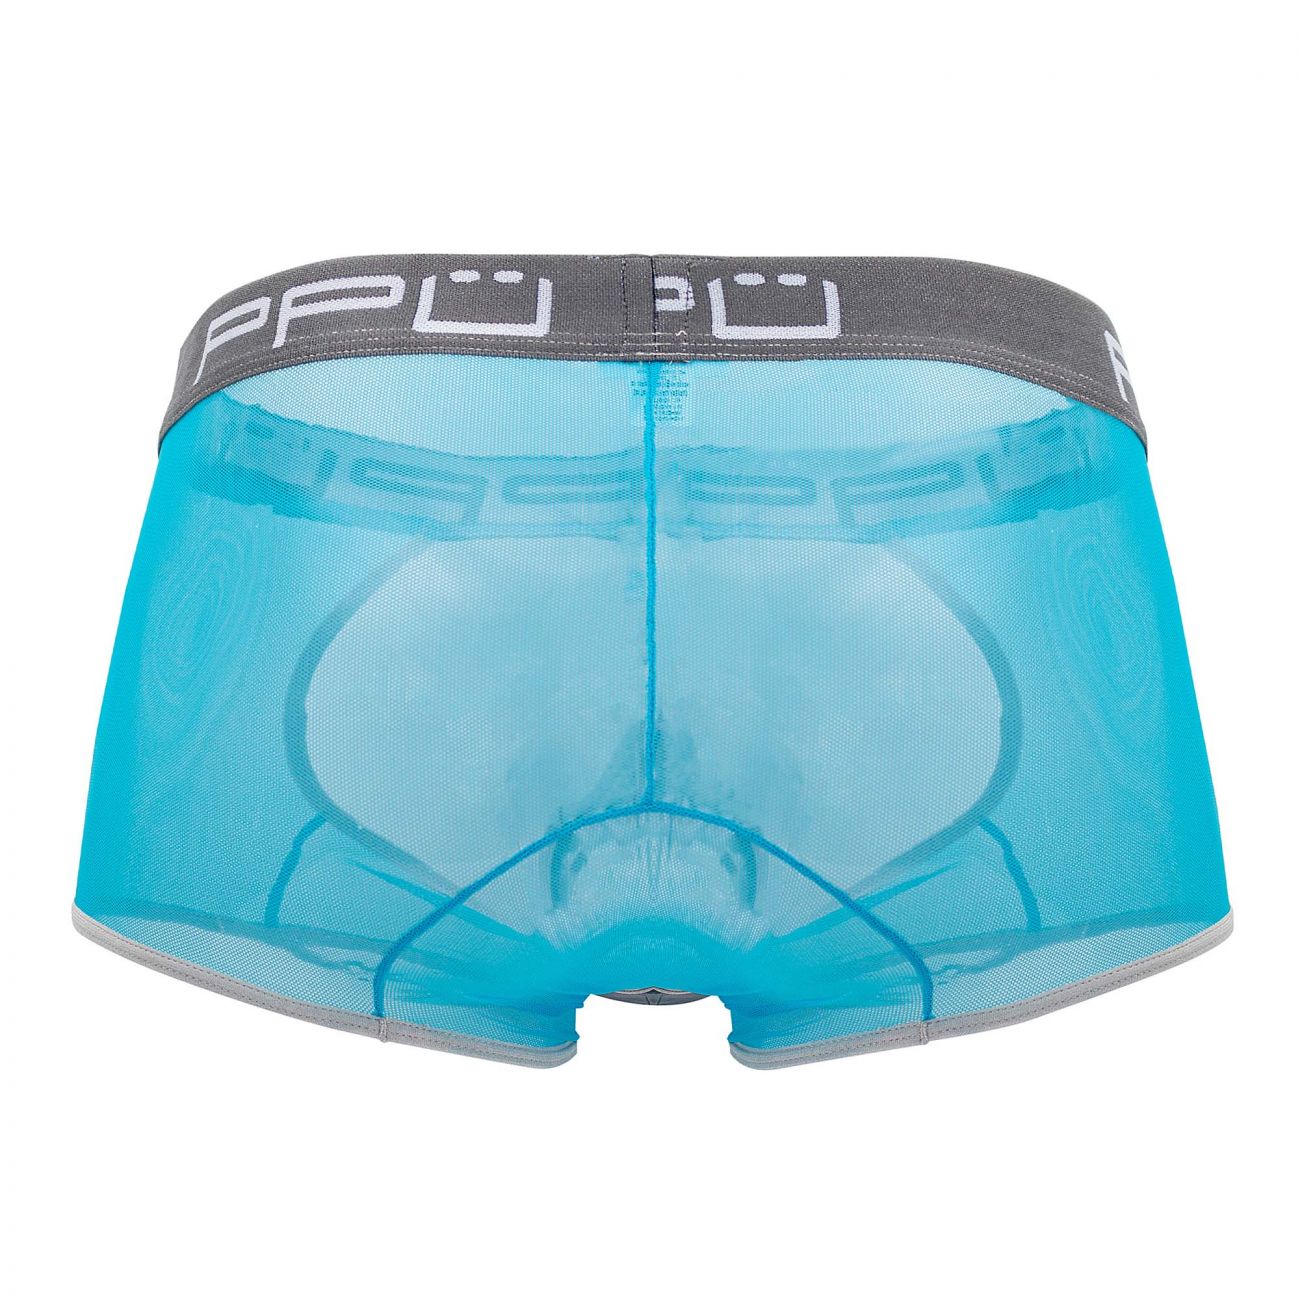 PPU 2108 Floater-Mesh Trunks Turquoise